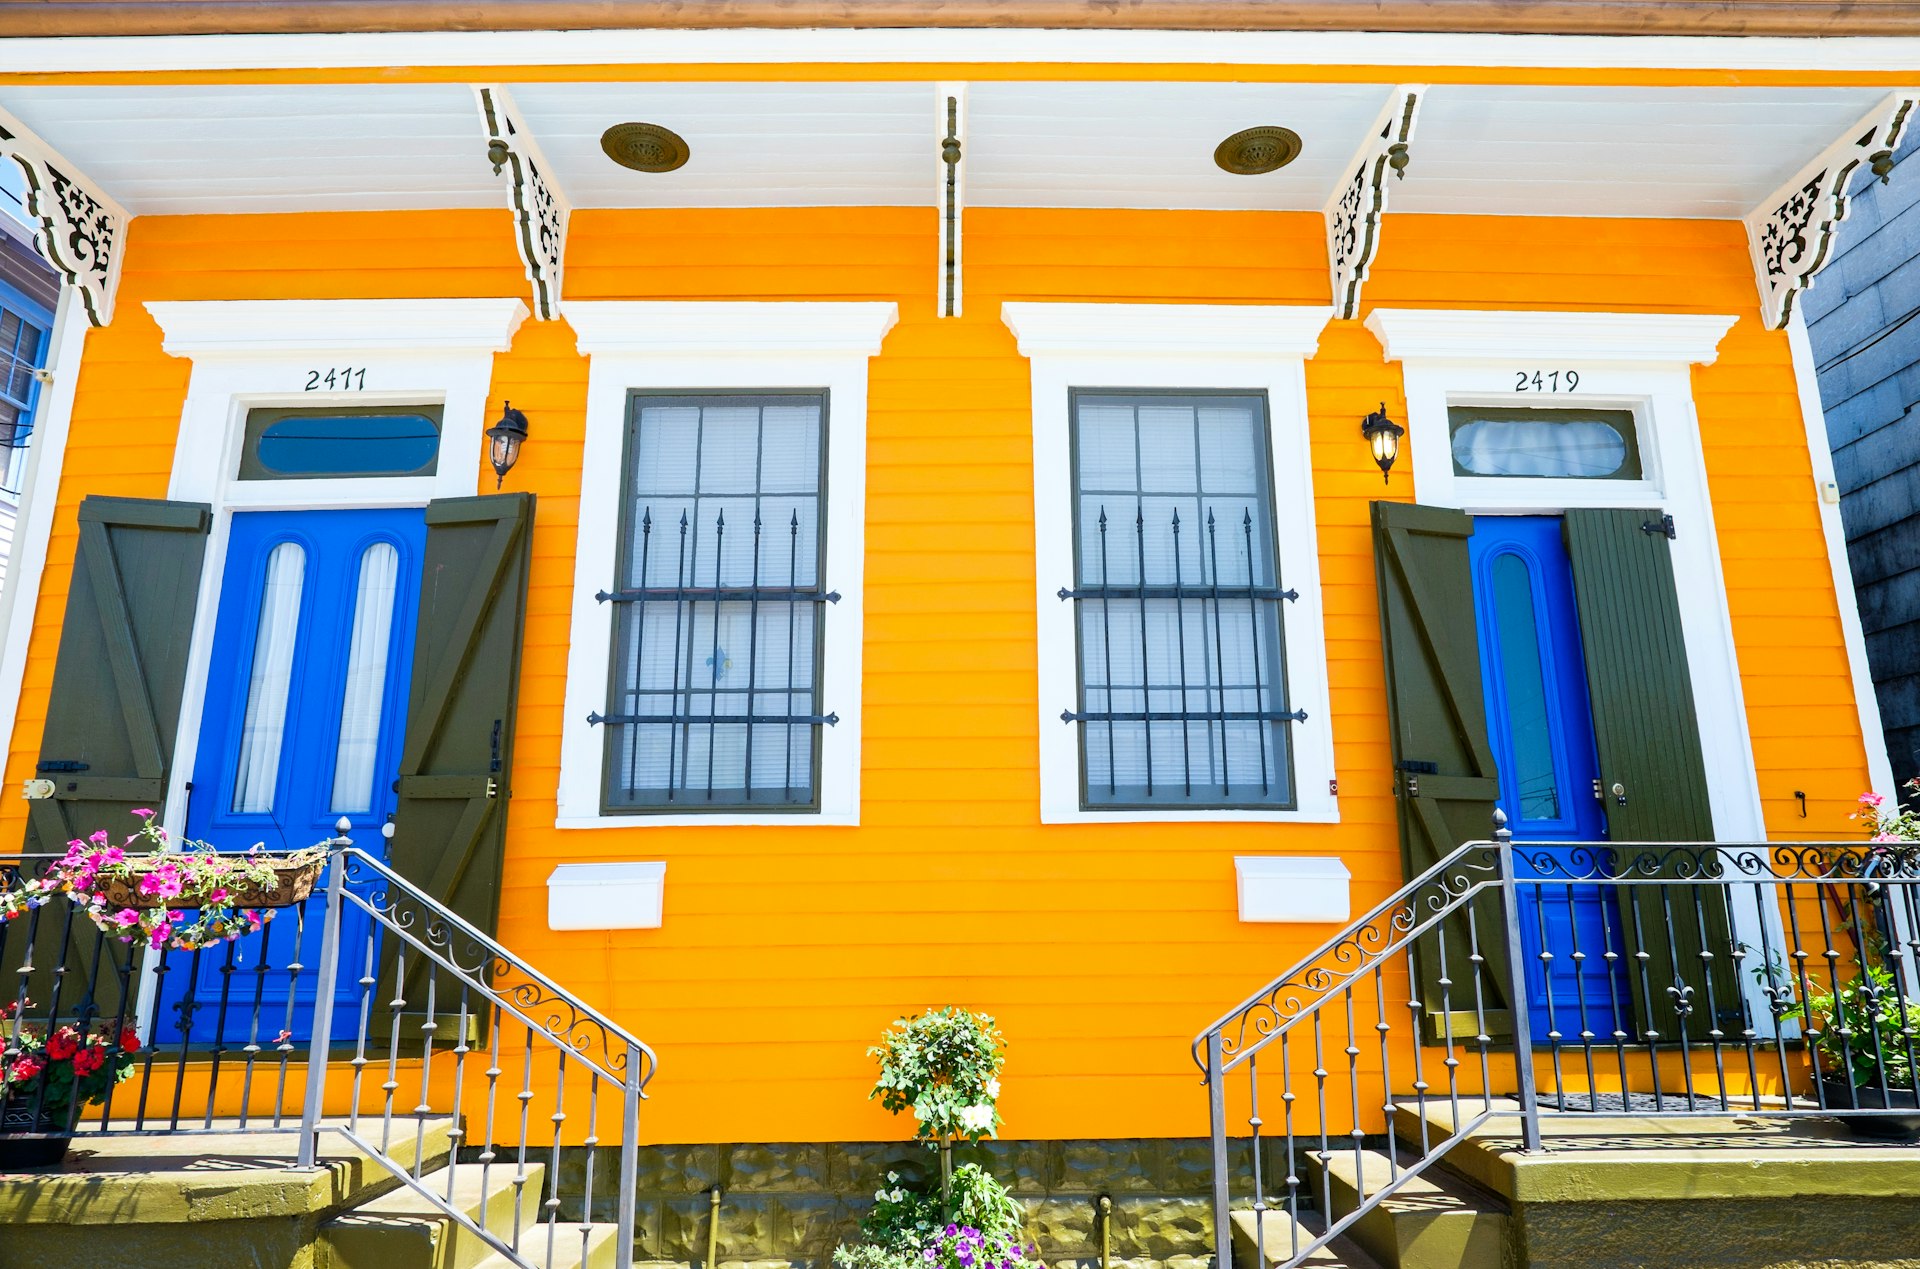 The front of a colorful historic house painted yellow with blue doors